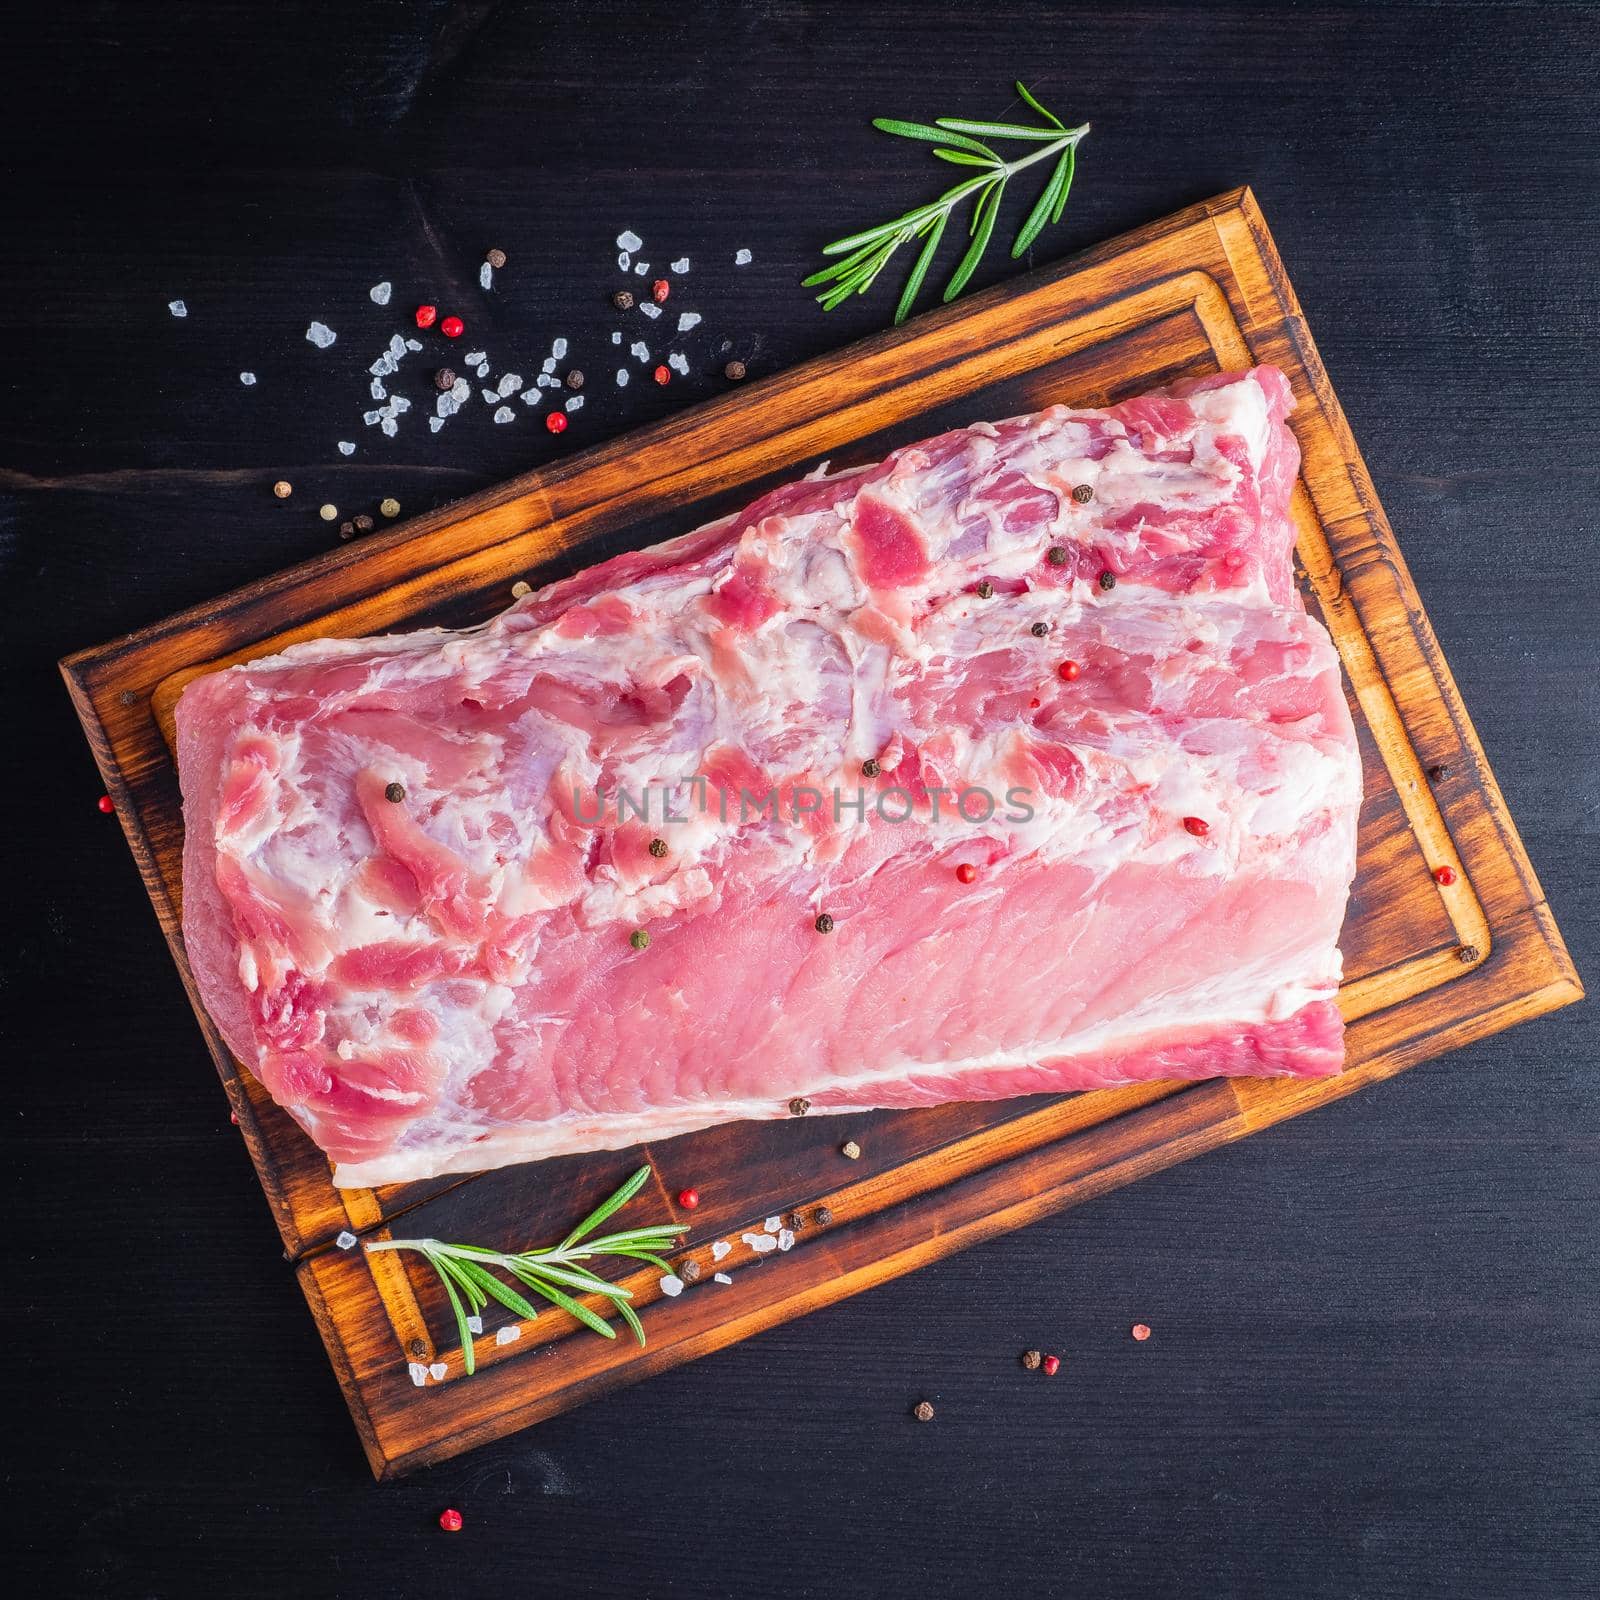 Big whole piece of pork meat with seasoning on chopping board on dark by NataBene